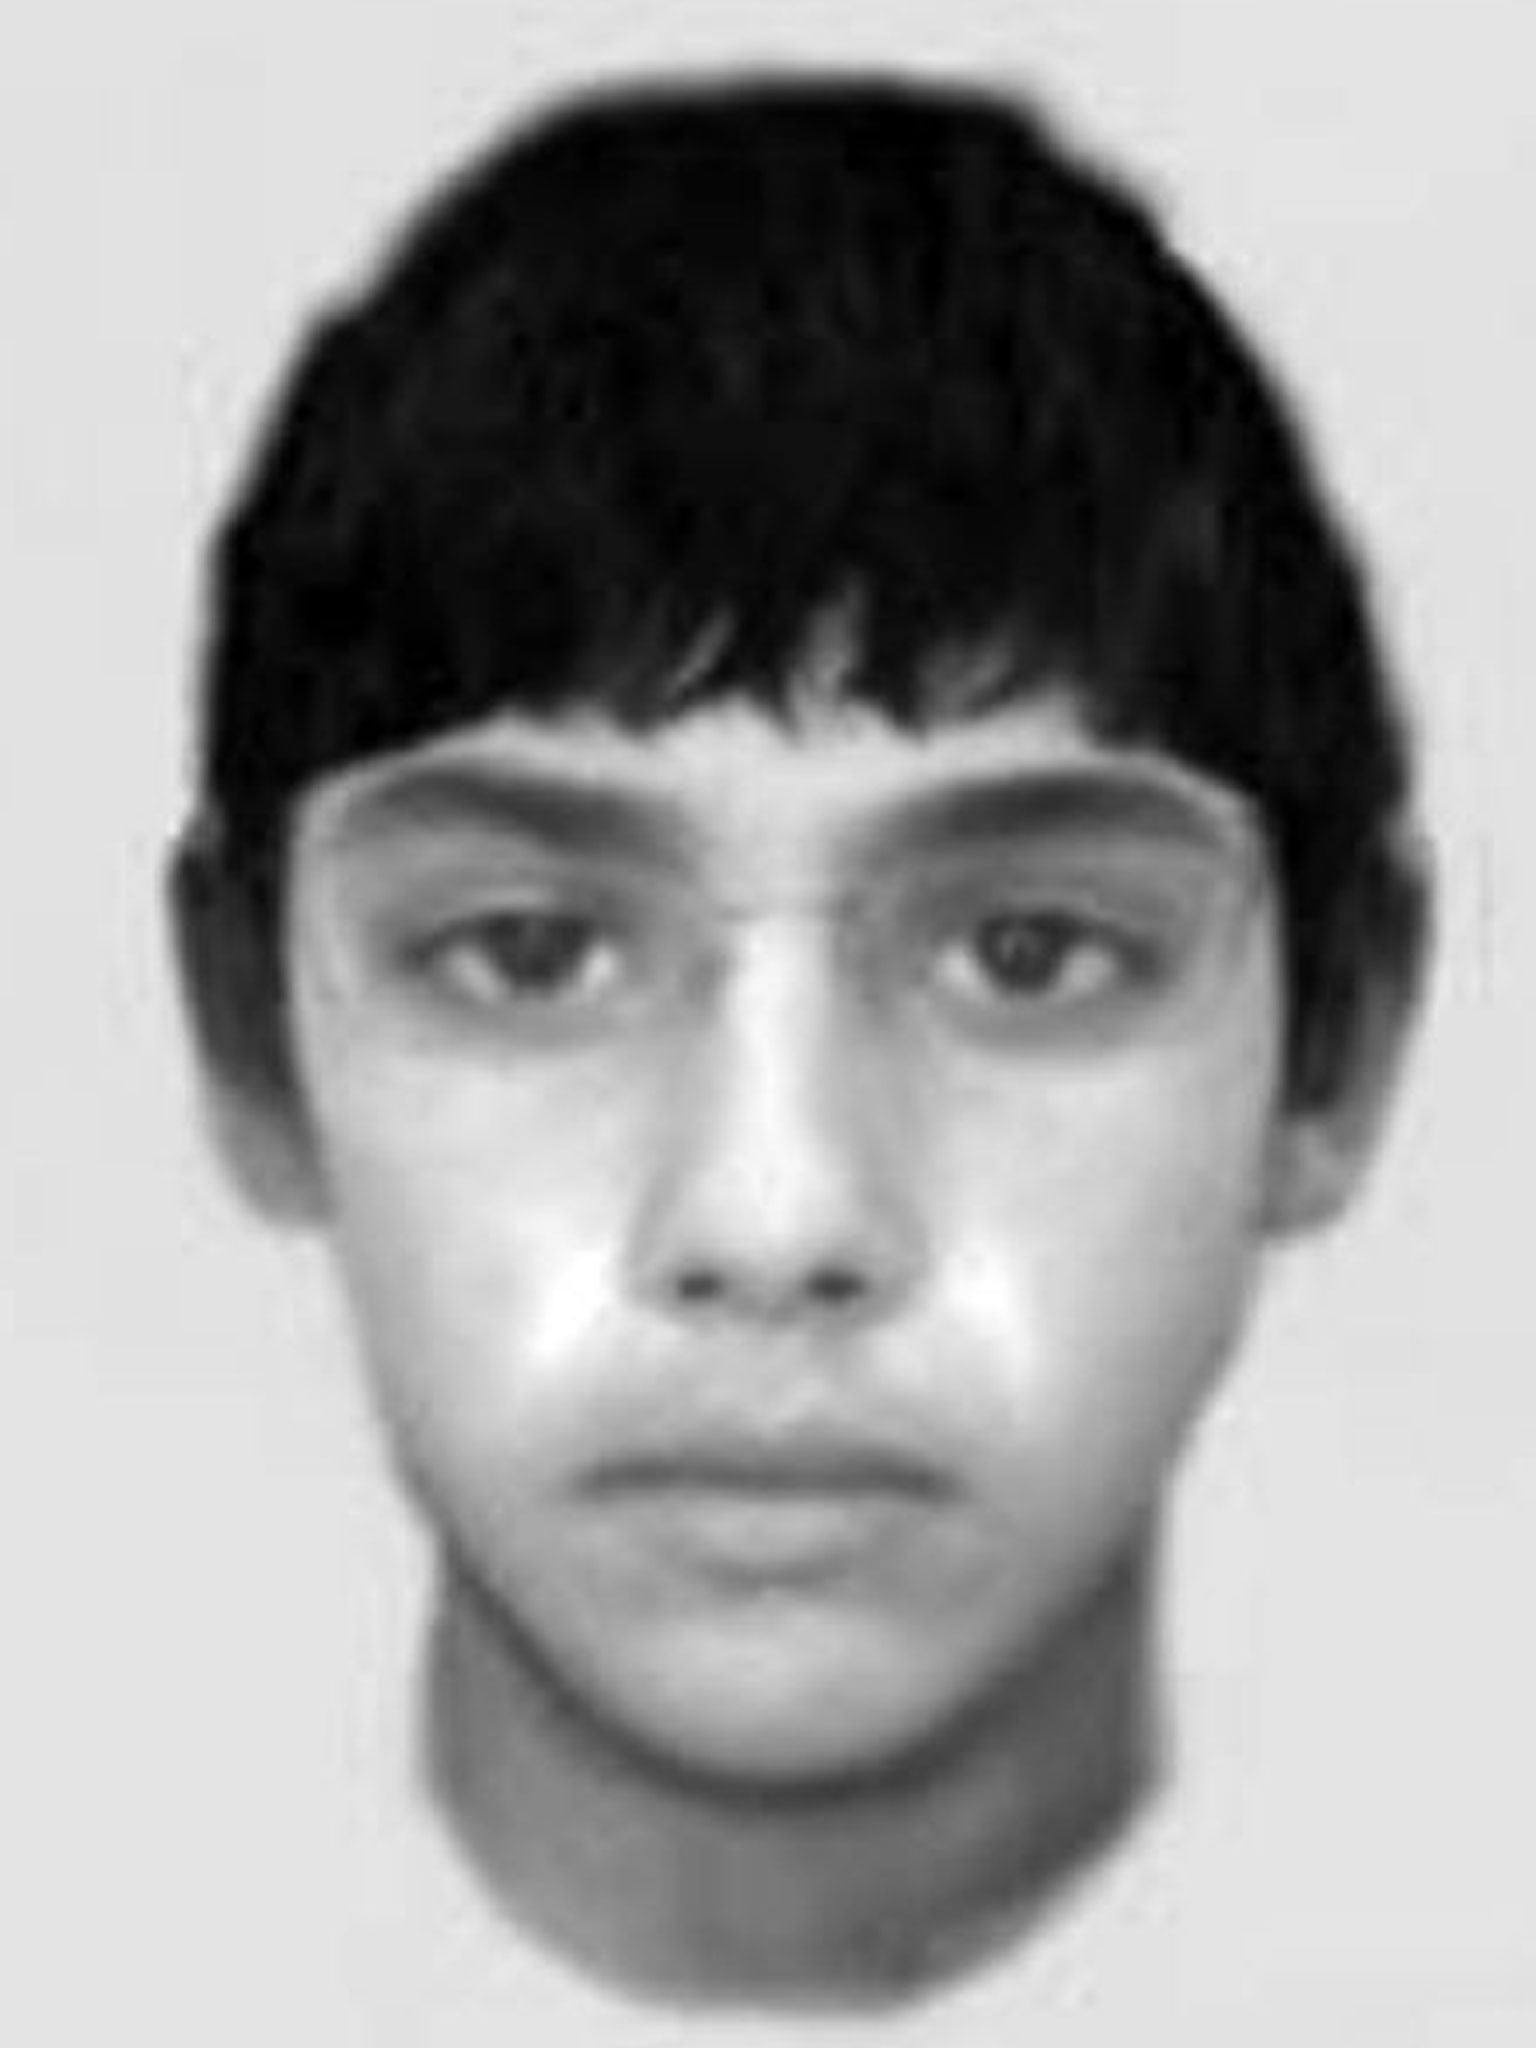 Undated handout evofit image issued by Greater Manchester Police of a boy aged just 12, who may be responsible for a string of sex attacks around a university campus